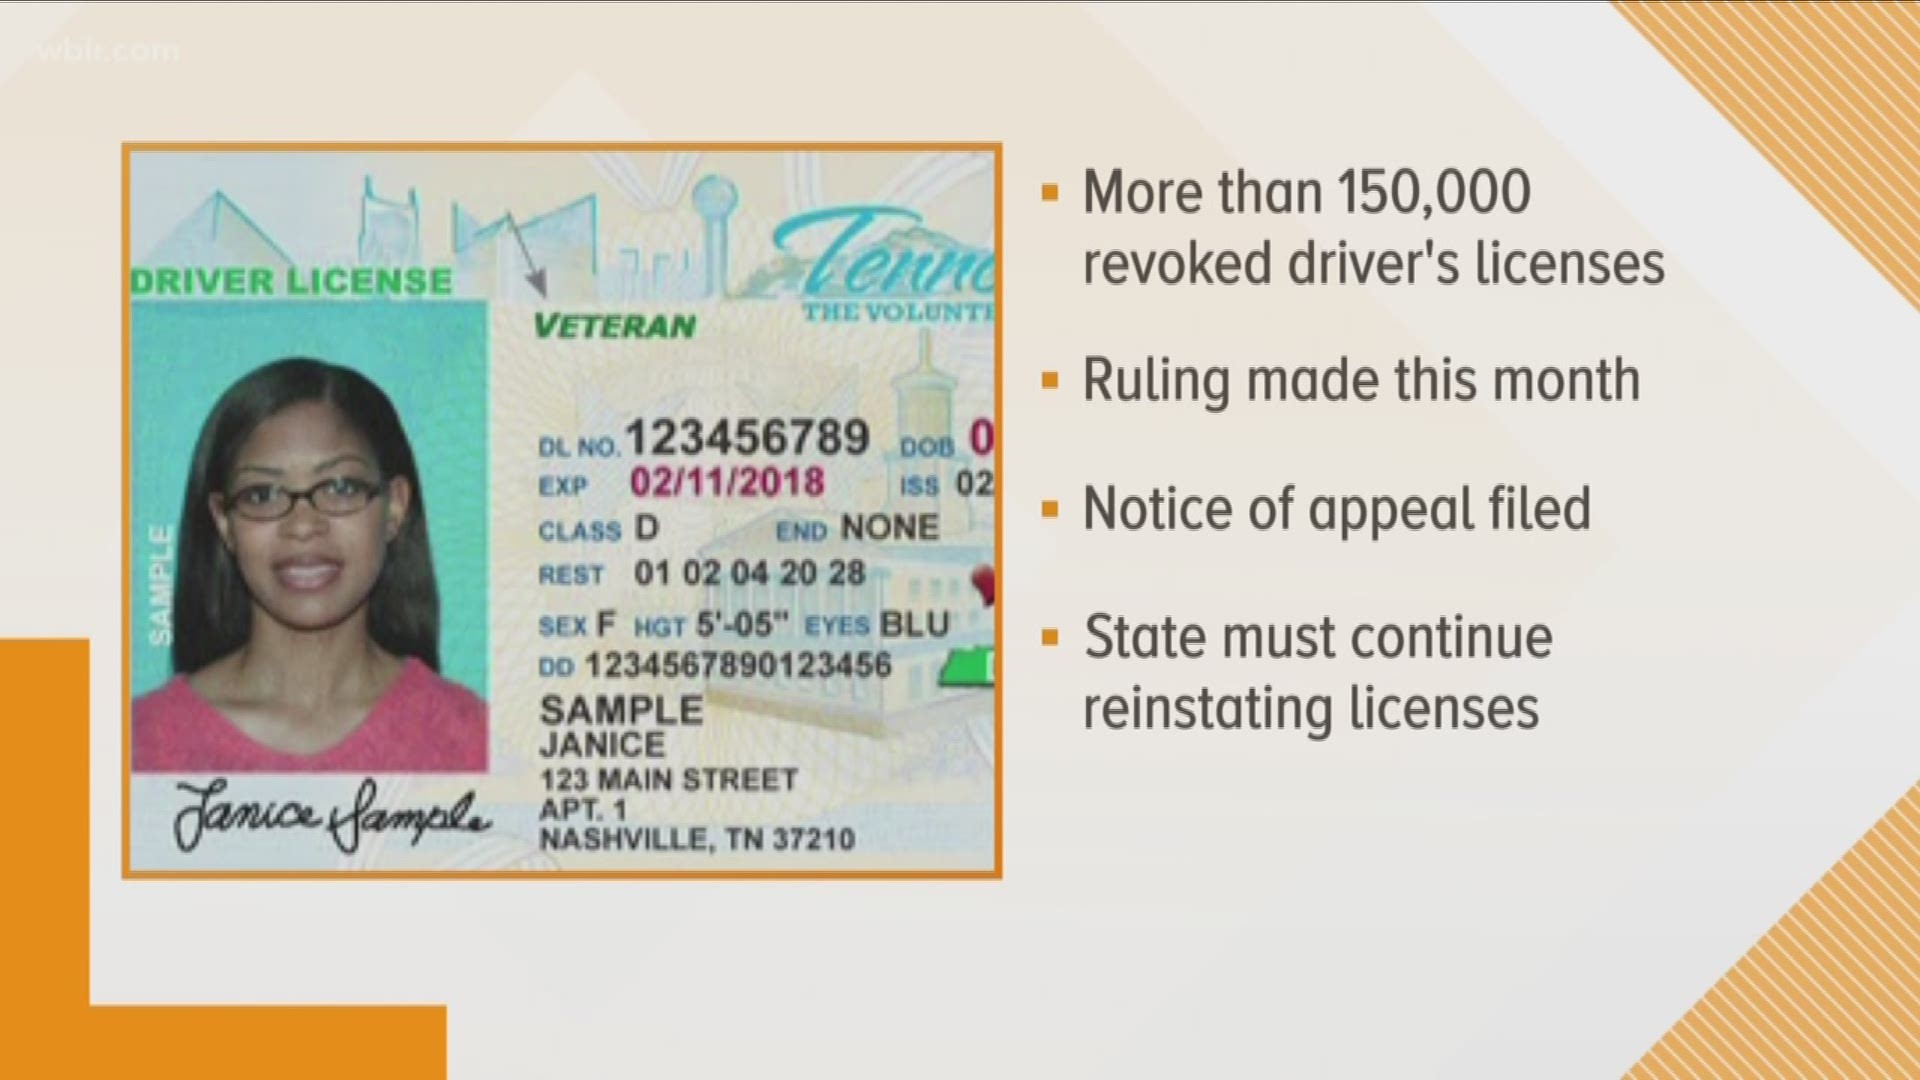 Tennessee is appealing a federal court's decision that would return driver's licenses to more than 150,000 people who could not pay court costs.